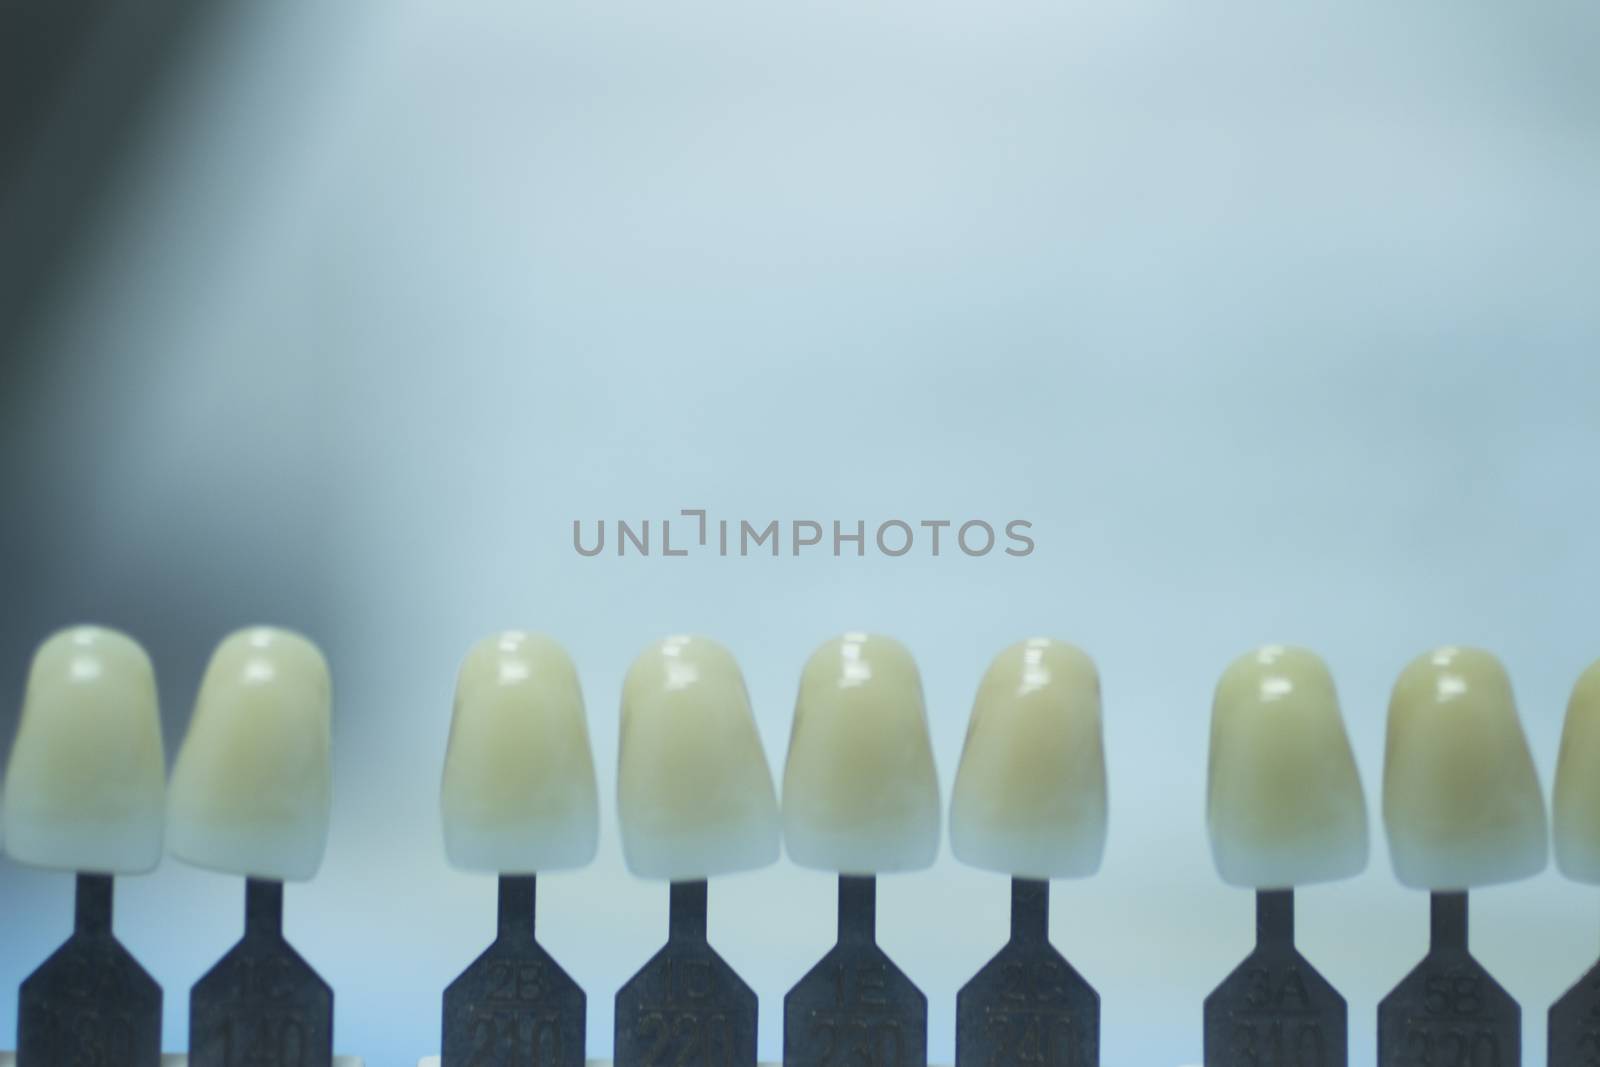 Dental tooth color guide for implants and crown colors  by edwardolive